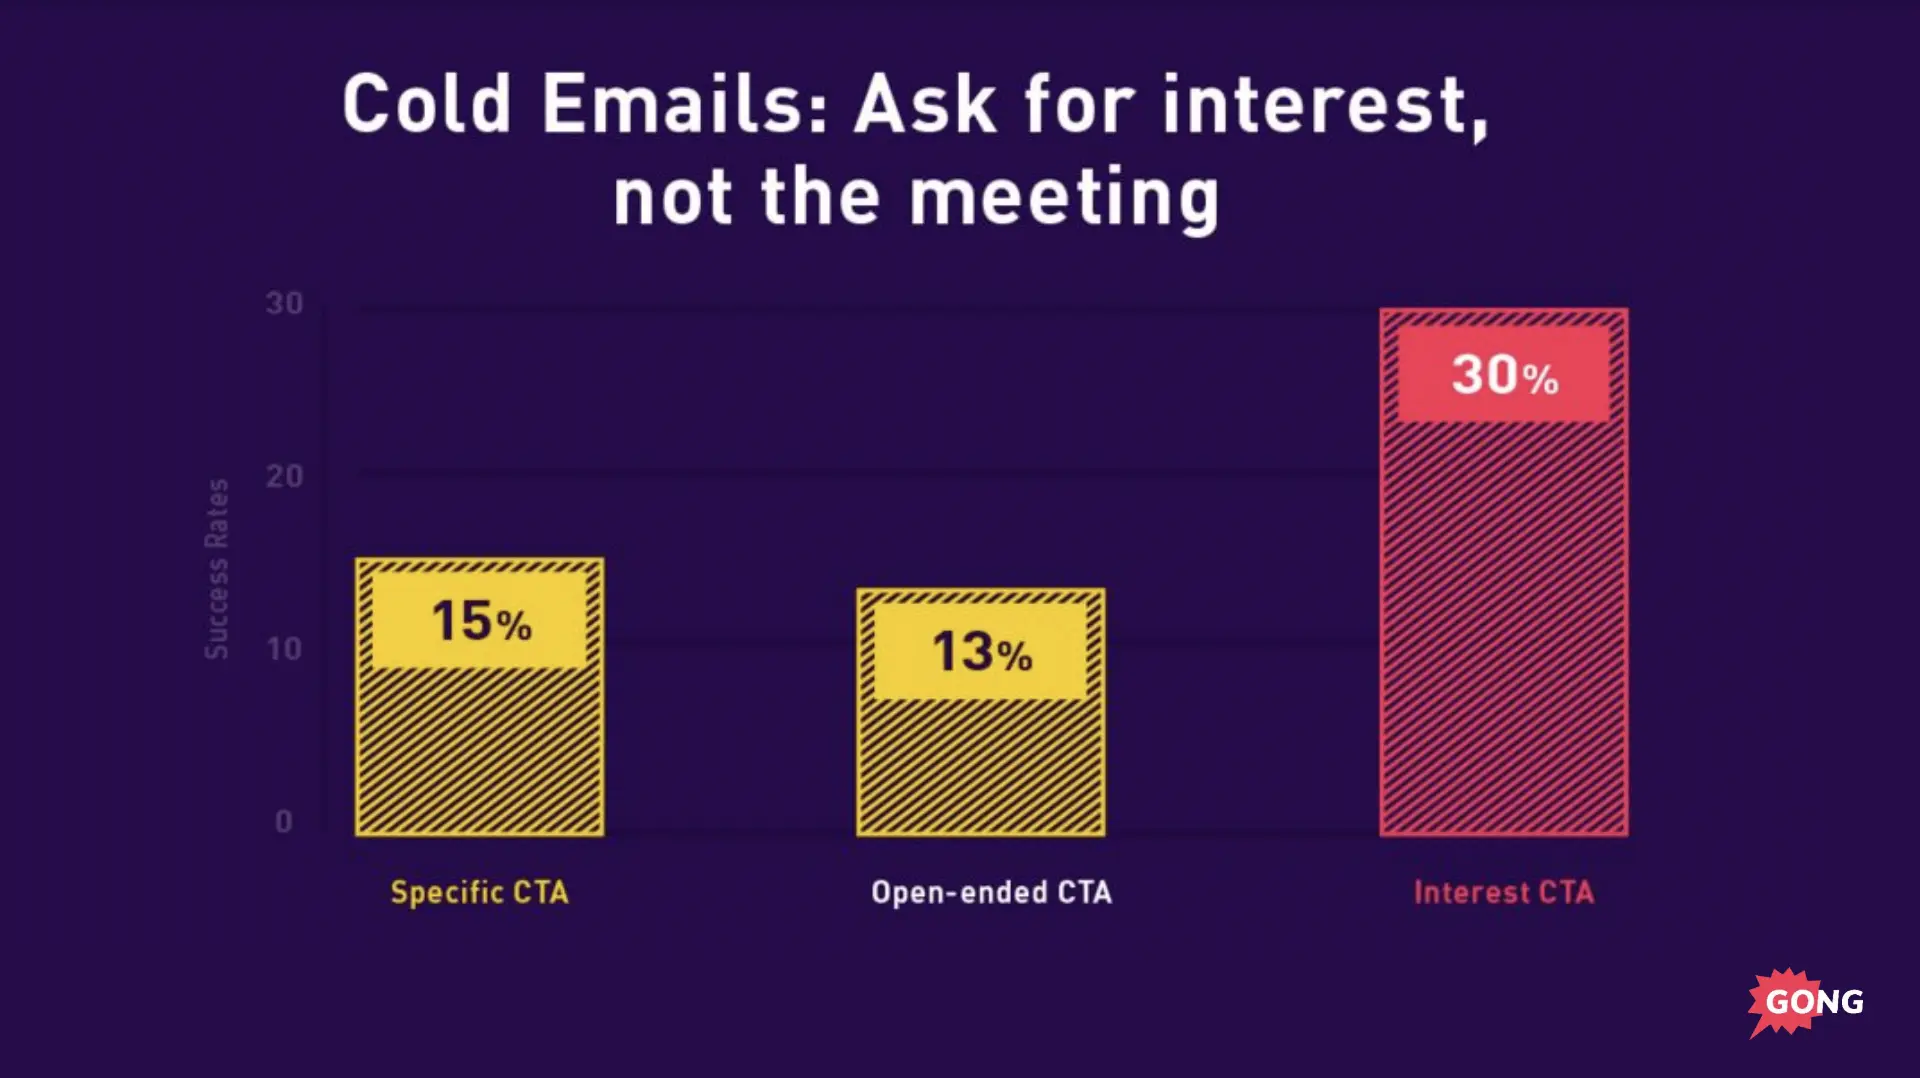 Graphic performance of different types of CTAs in cold emails